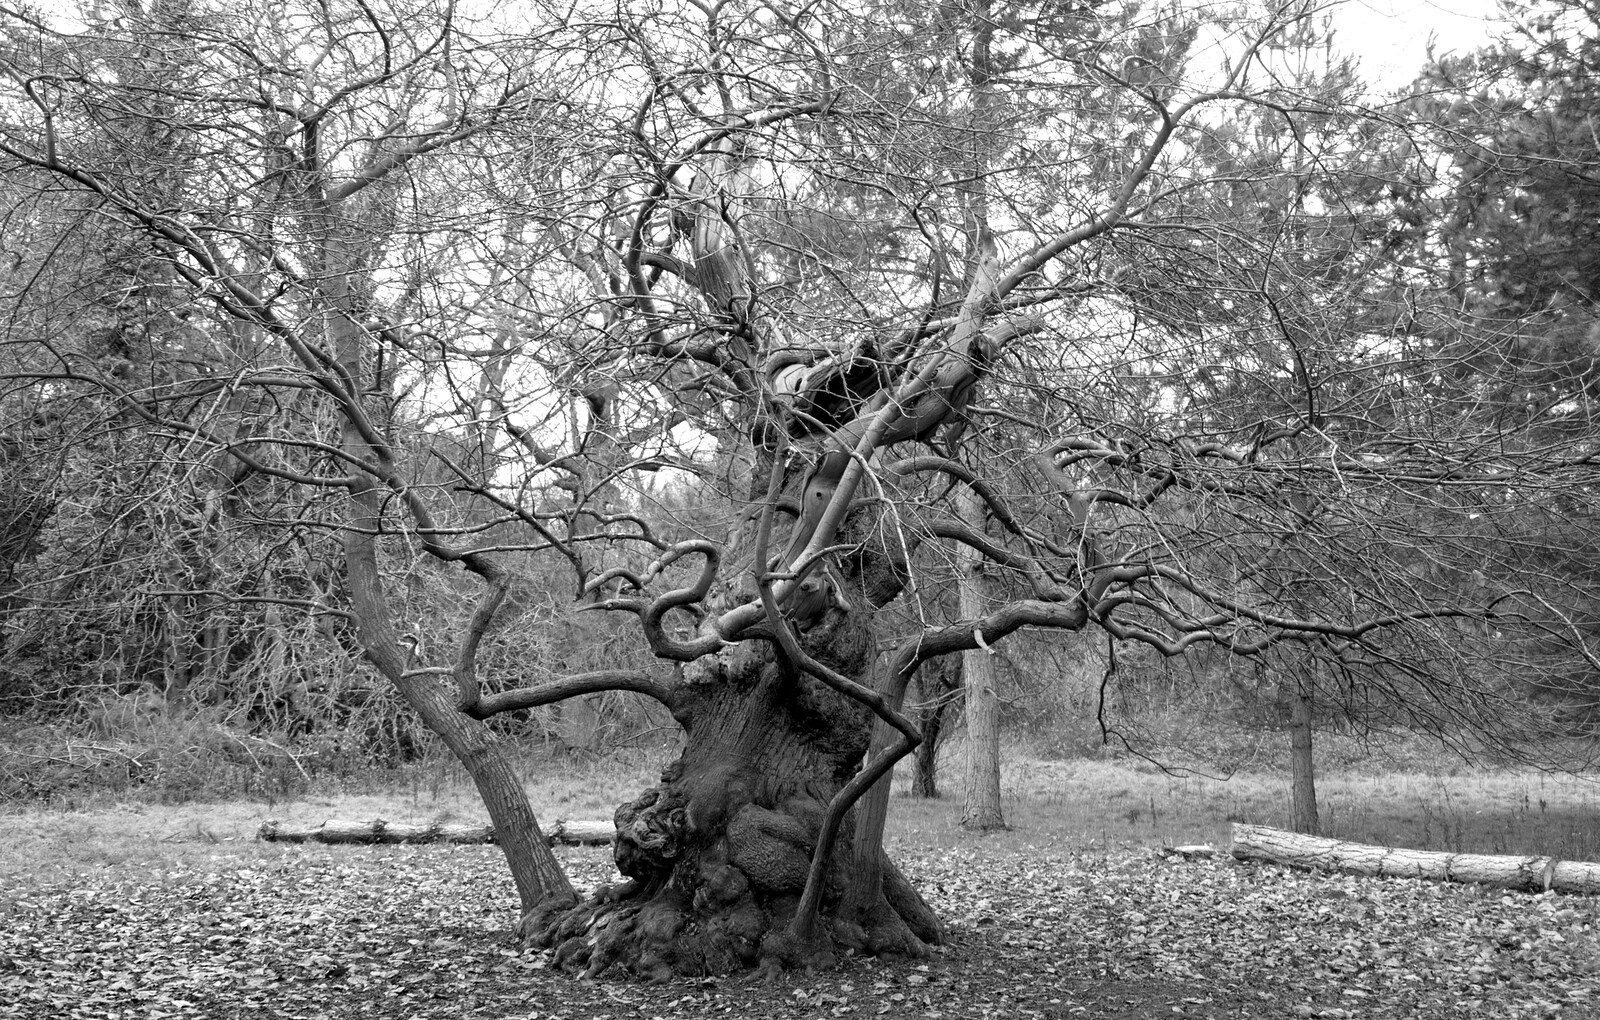 A very gnarly tree from Ickworth House, Horringer, Suffolk - 29th December 2018